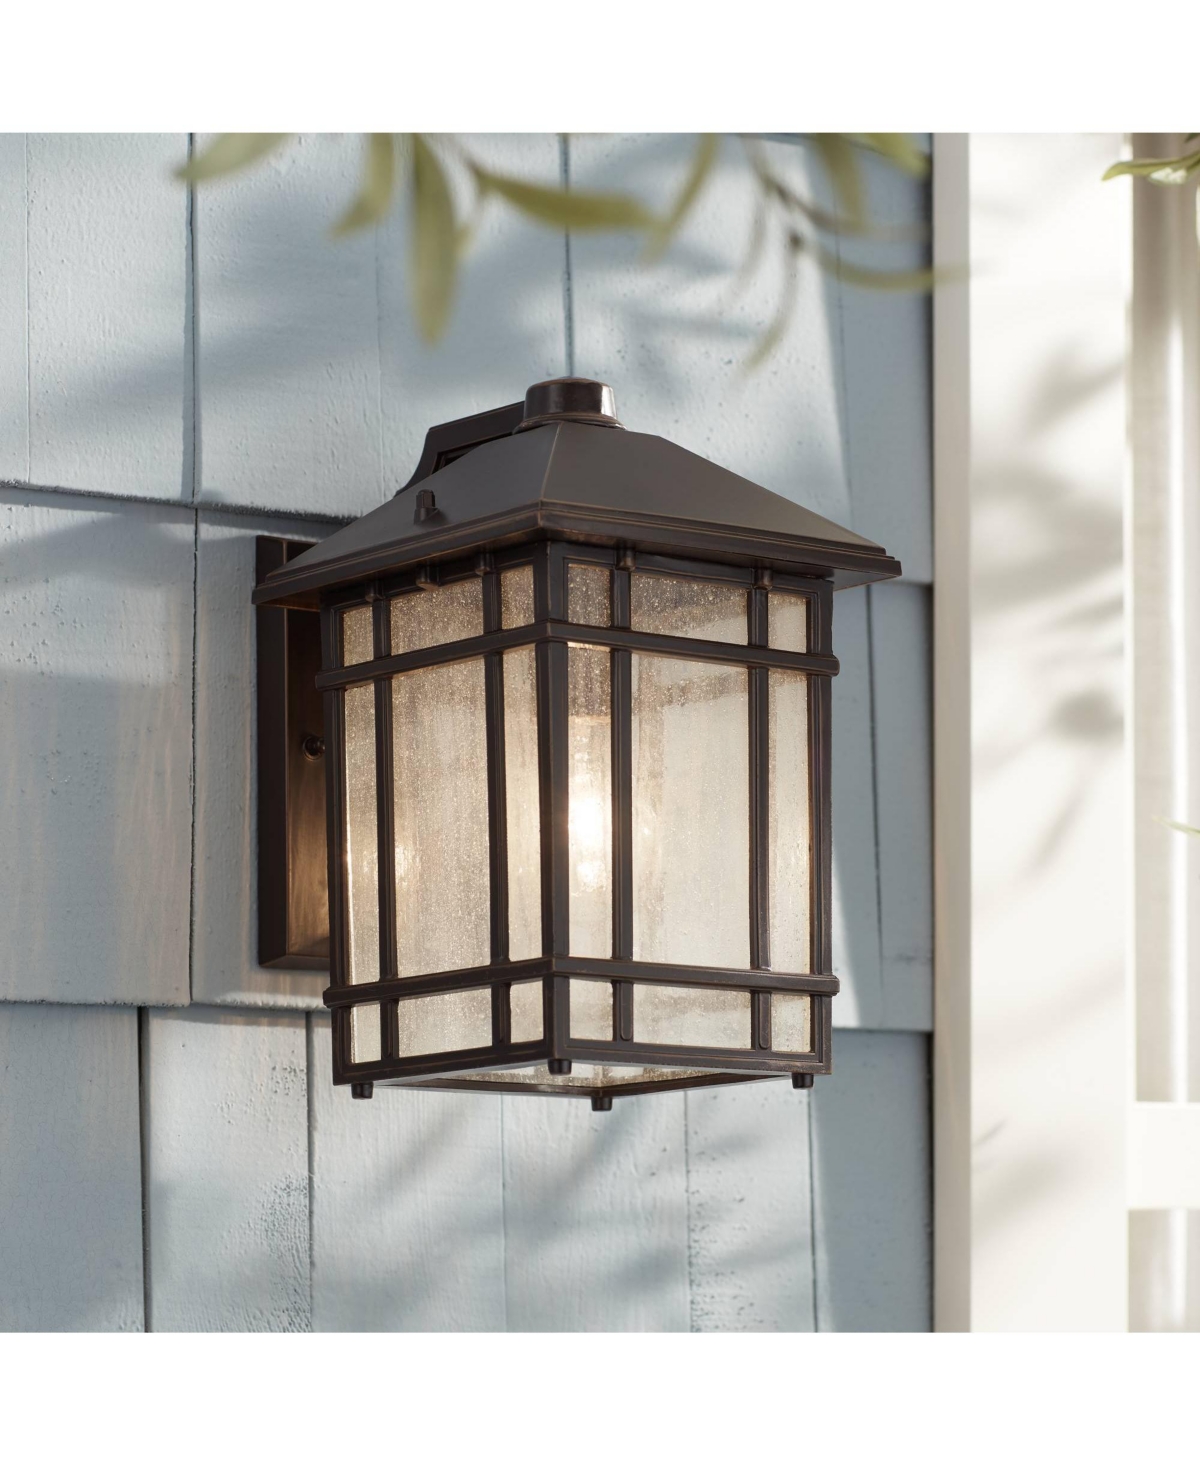 Sierra Craftsman Art Deco Outdoor Wall Light Fixture Rubbed Bronze Brown Steel 11" Frosted Seeded Glass Panels for Exterior House Porch Patio Outside